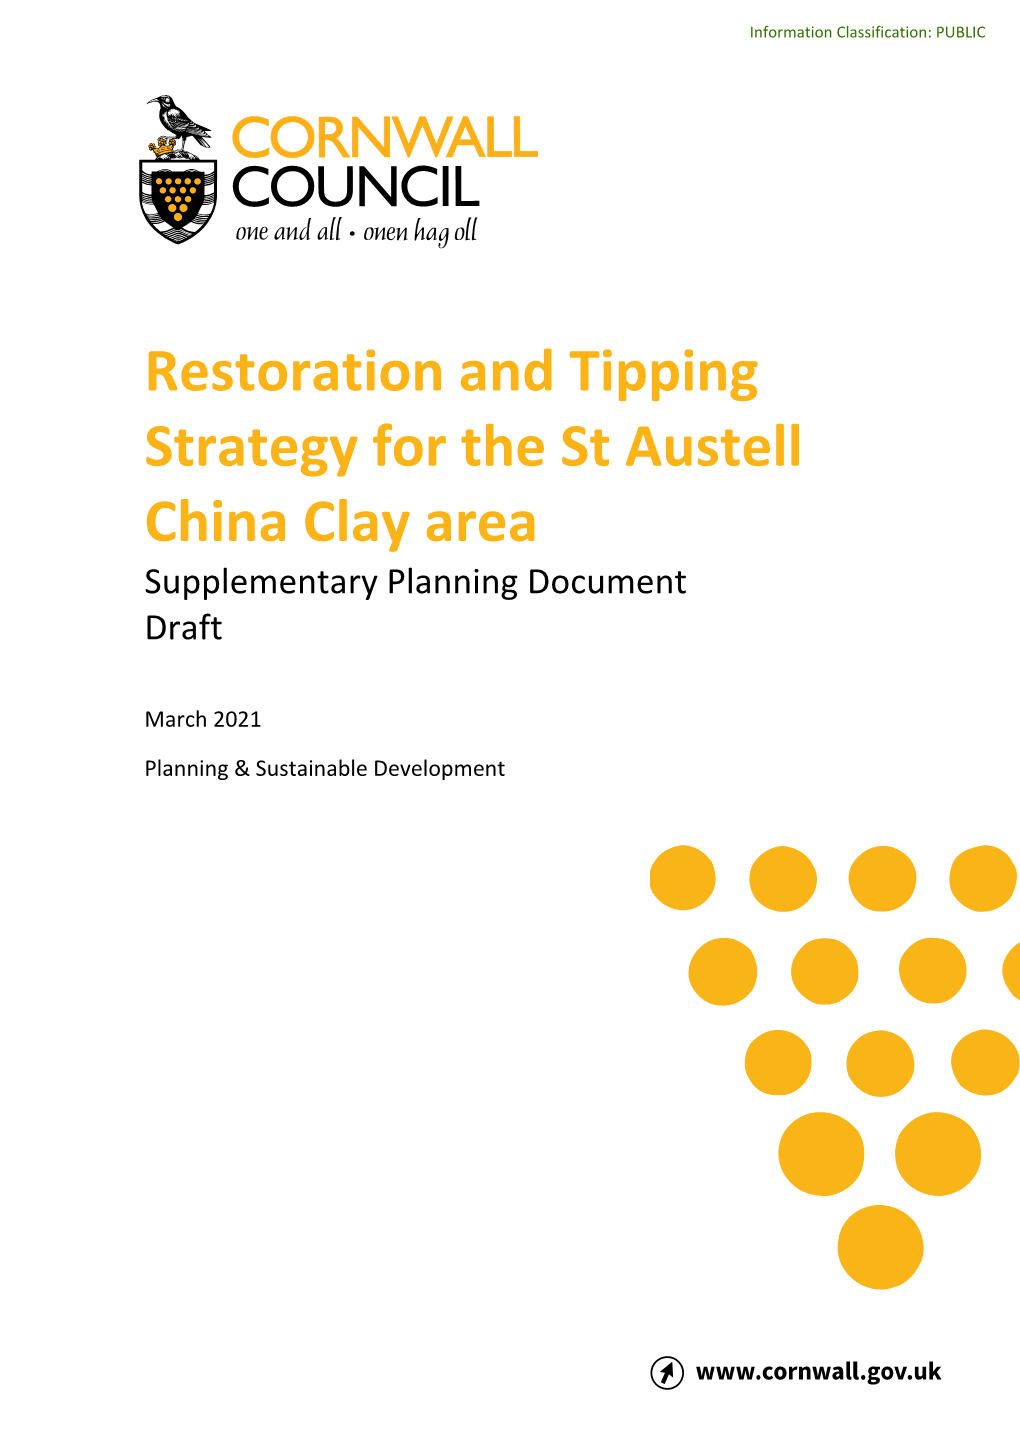 Restoration and Tipping Strategy for the St Austell China Clay Area